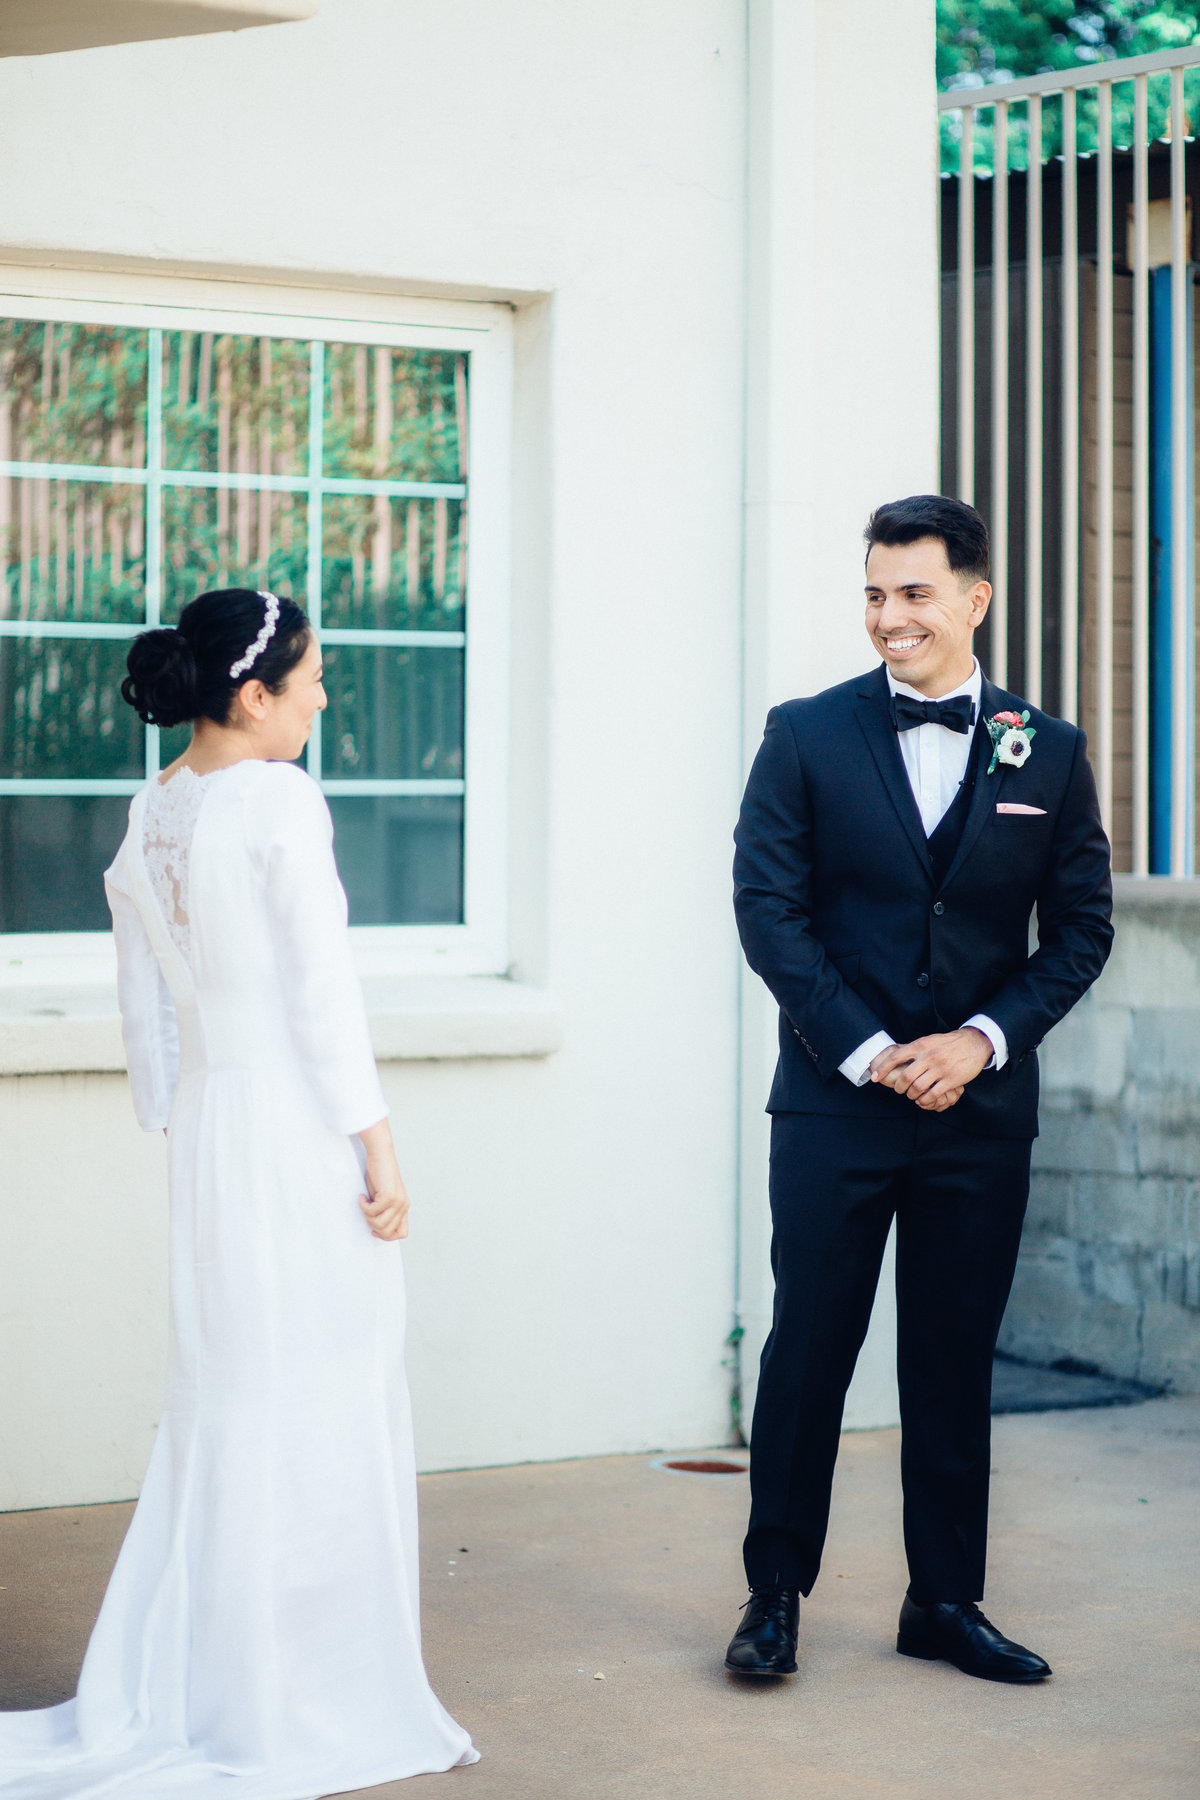 Wedding Photograph Of Bride in White Dress And Groom in Black Suit Los Angeles